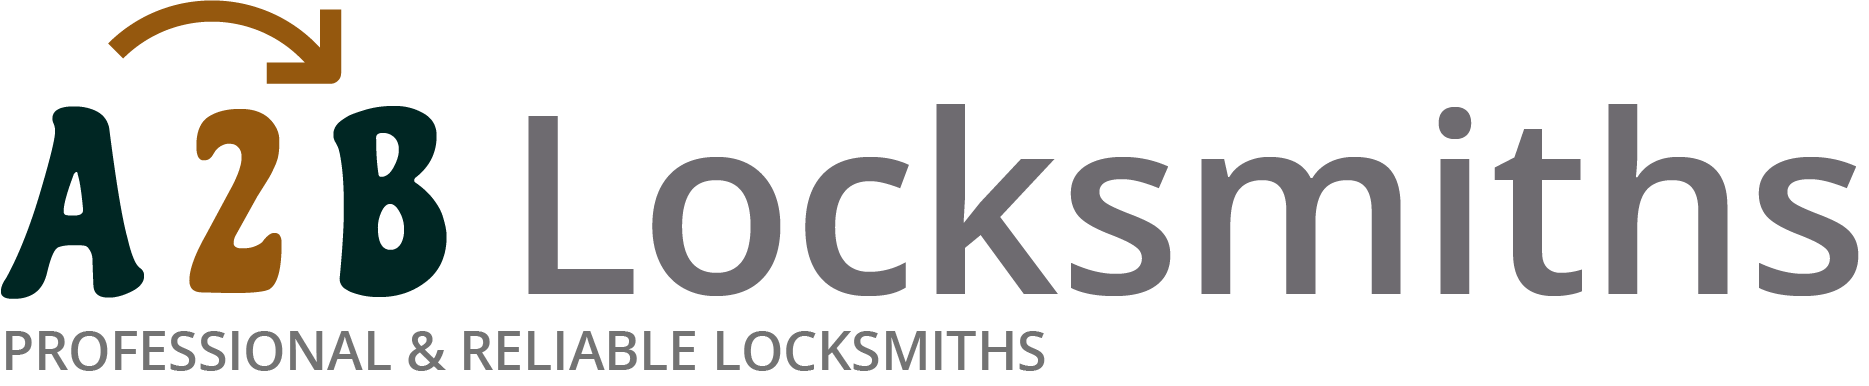 If you are locked out of house in Downham, our 24/7 local emergency locksmith services can help you.